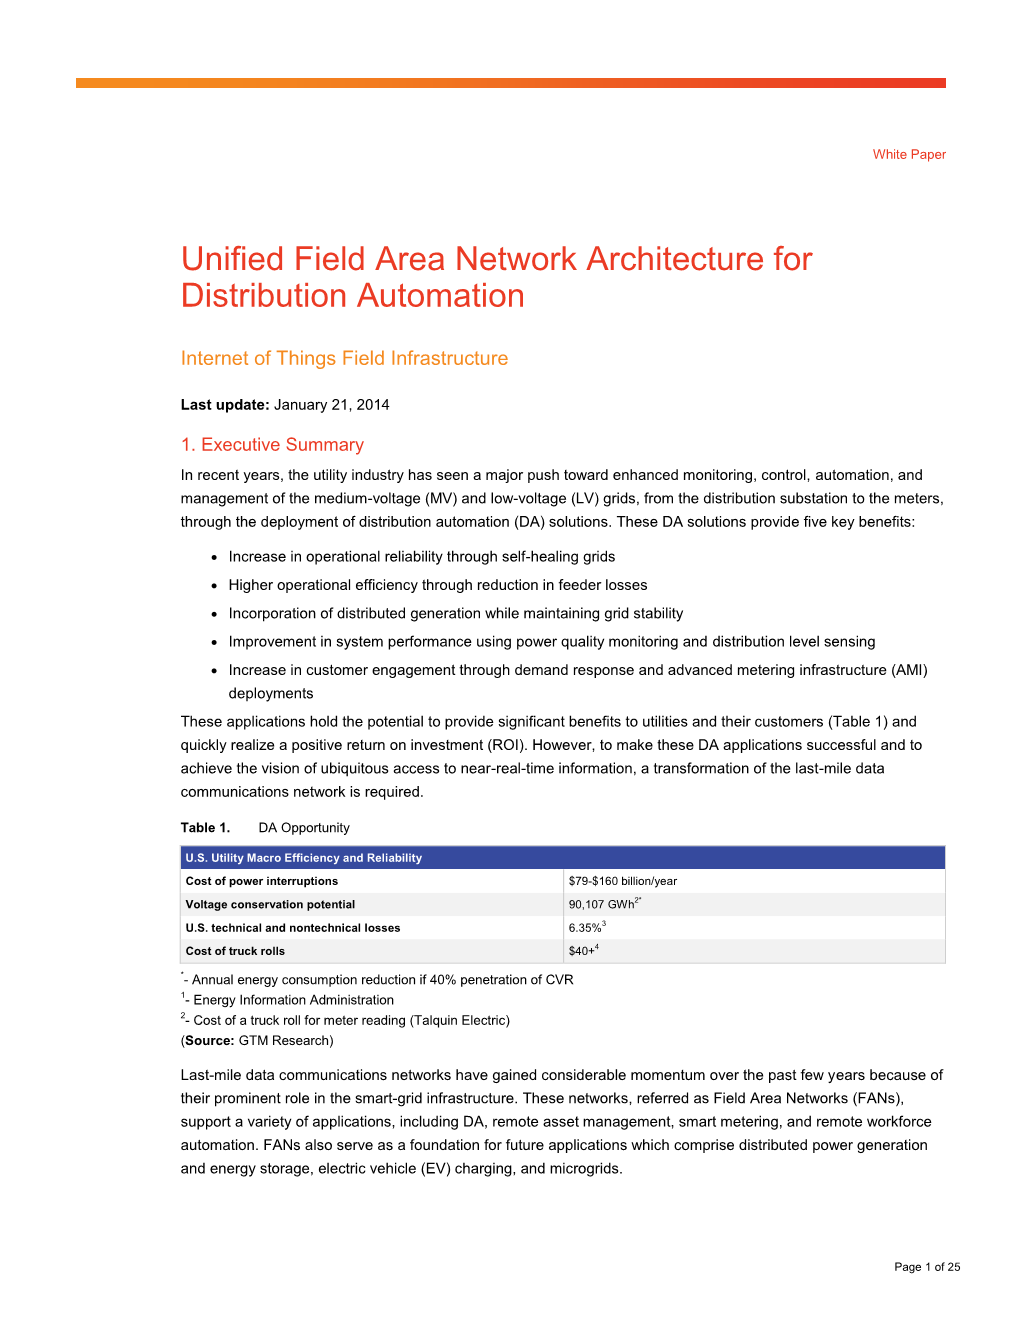 Unified Field Area Network Architecture for Distribution Automation